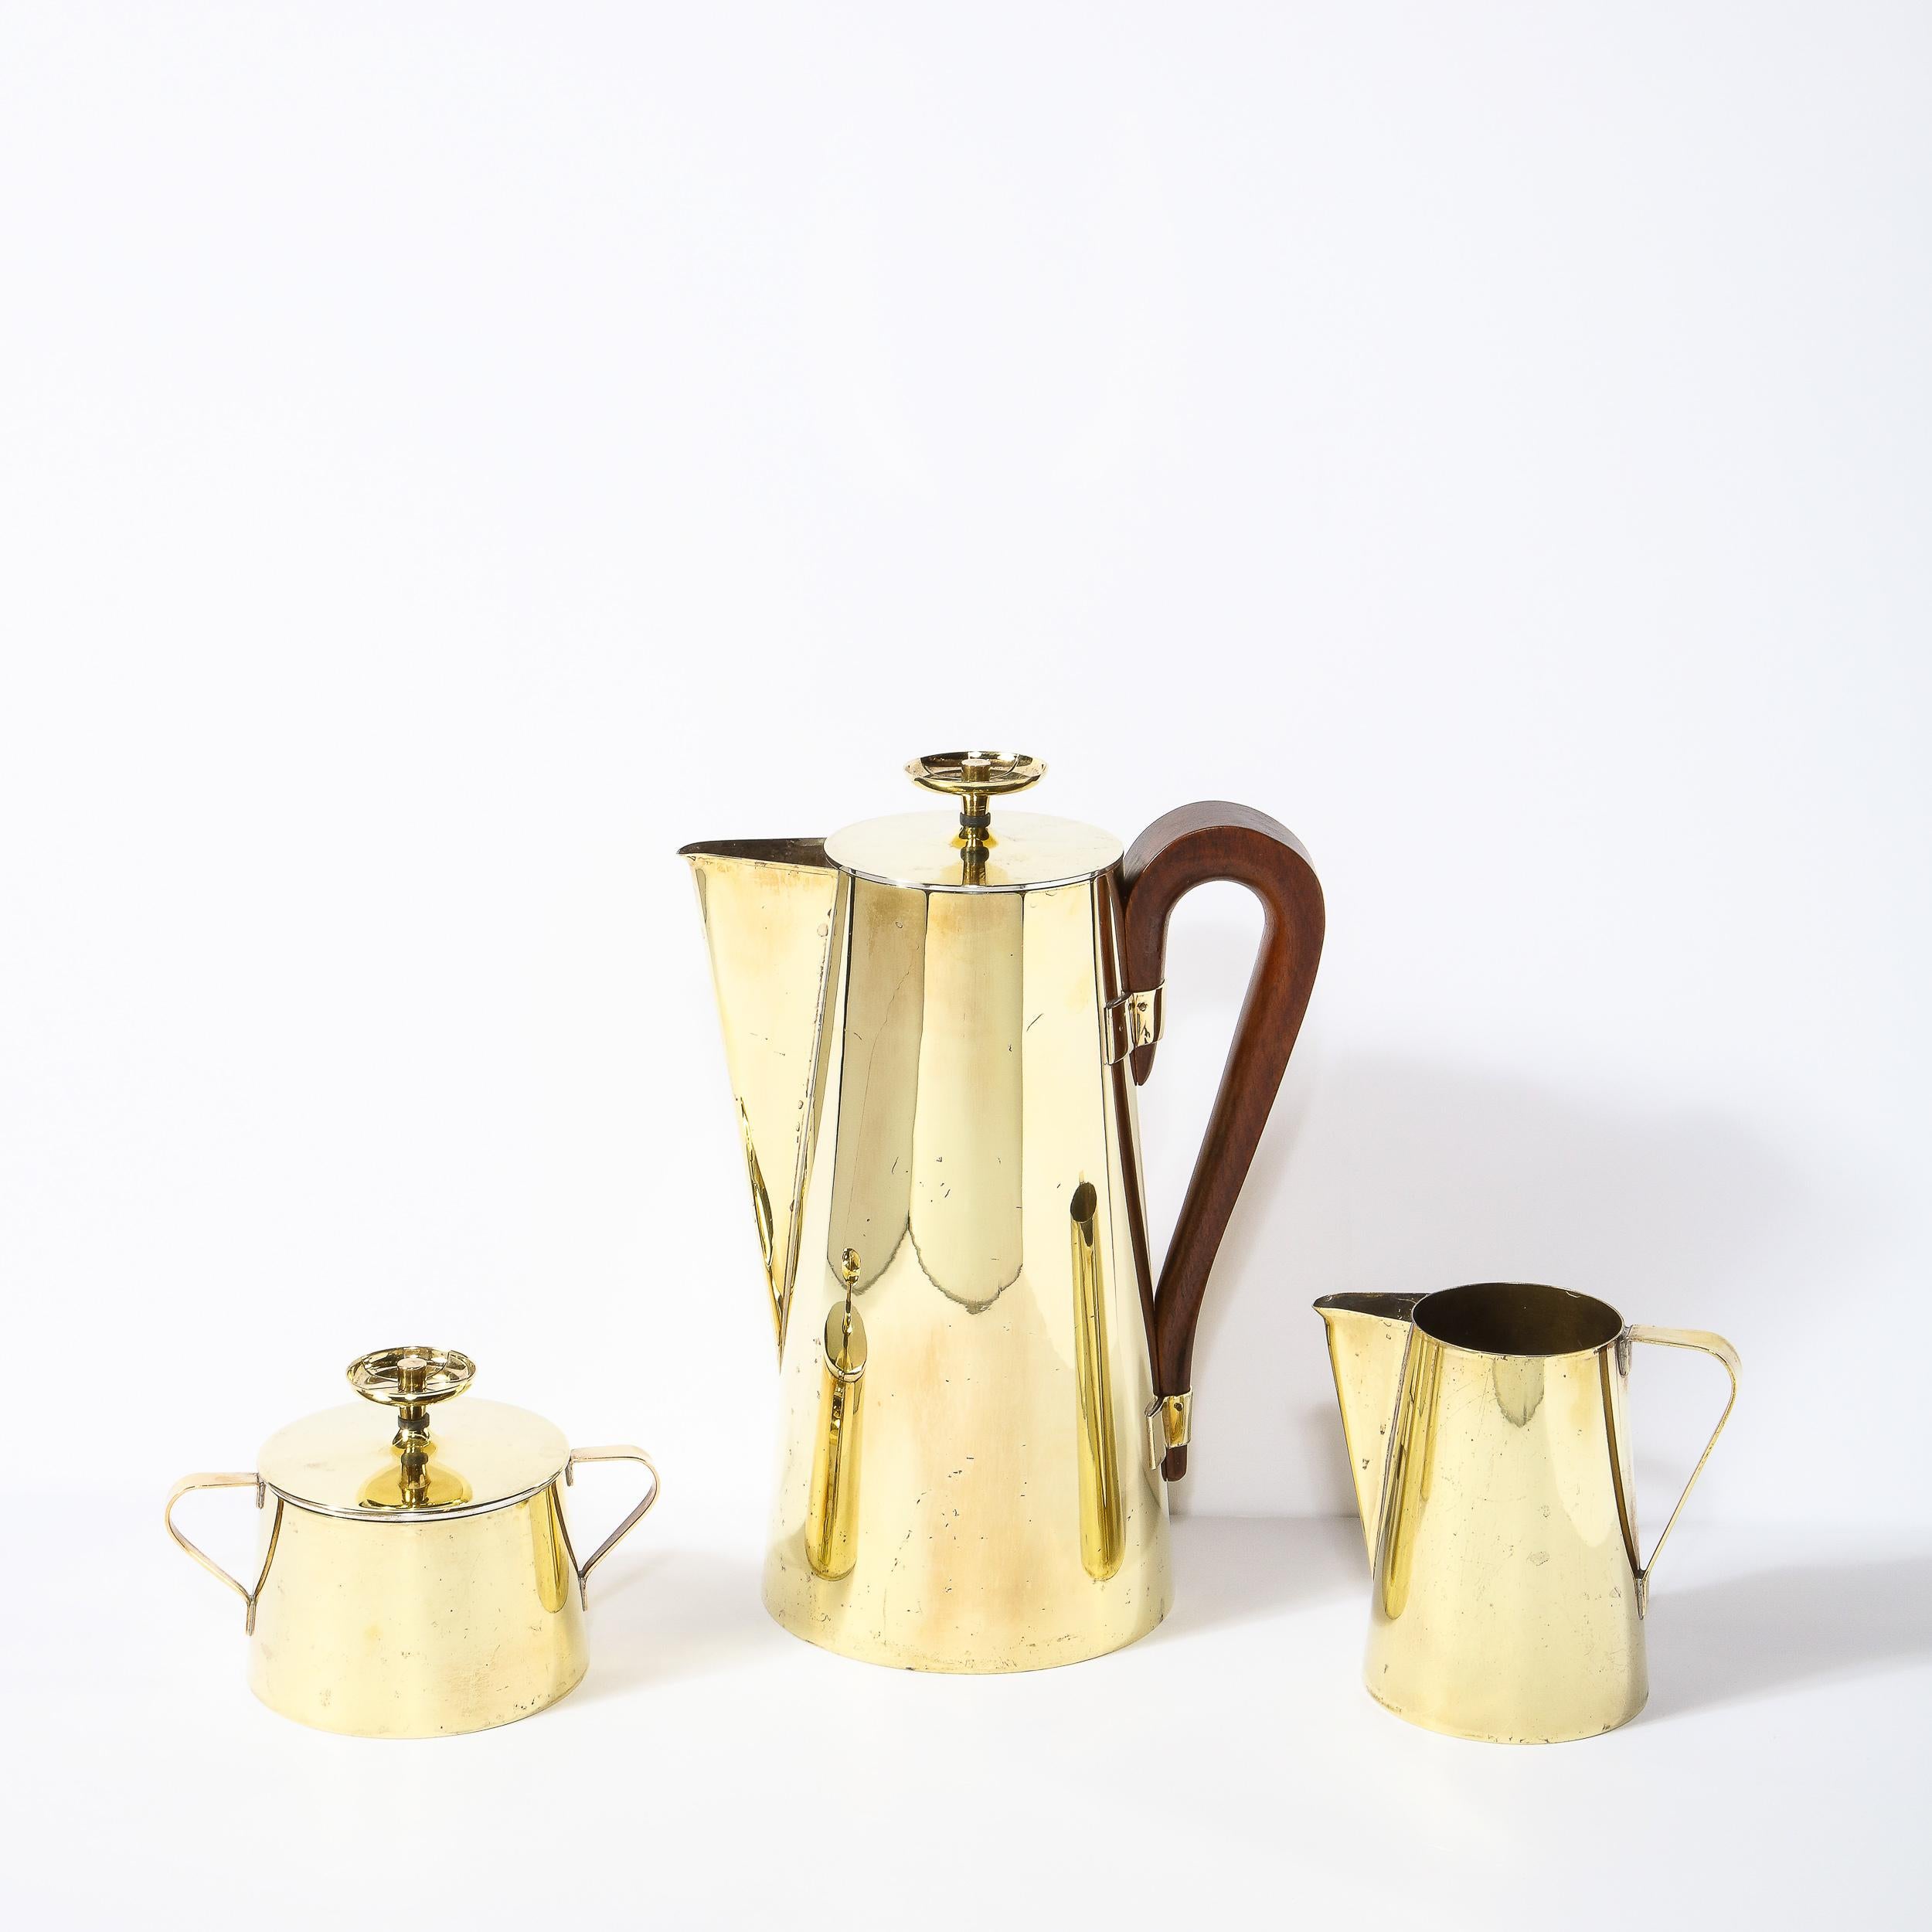 This gorgeous coffee or tea service set was designed by Tommi Parzinger, among the most celebrated Mid-Century Modernist designers, for Dorlyn Silversmiths circa 1960. The set includes one tea pot, a creamer, and a sugar bowl with lid. The service